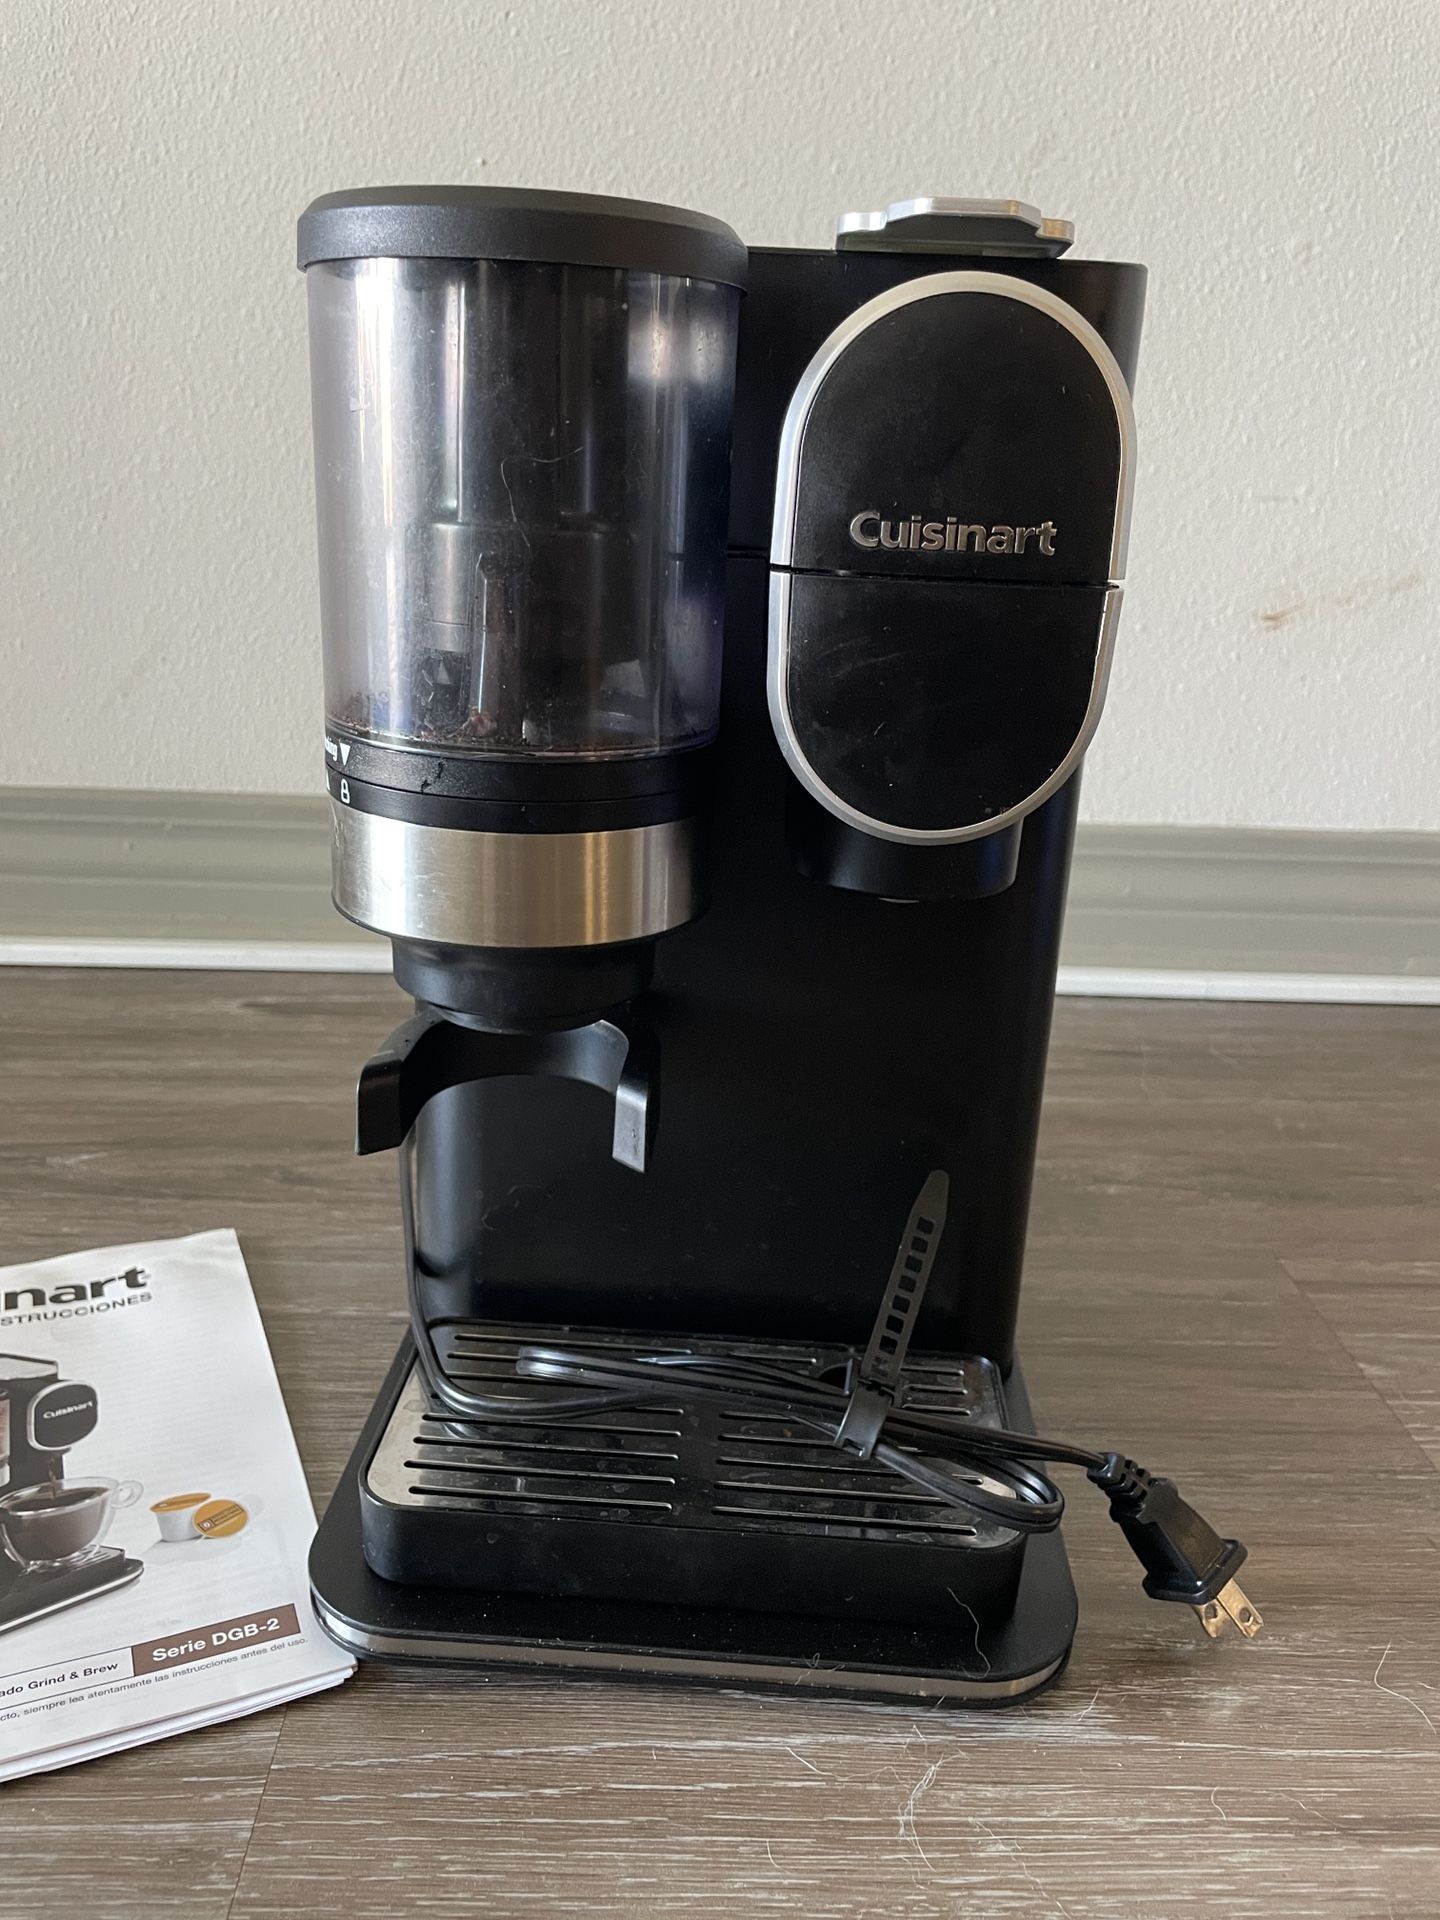 Cuisinart One Cup Coffee Maker